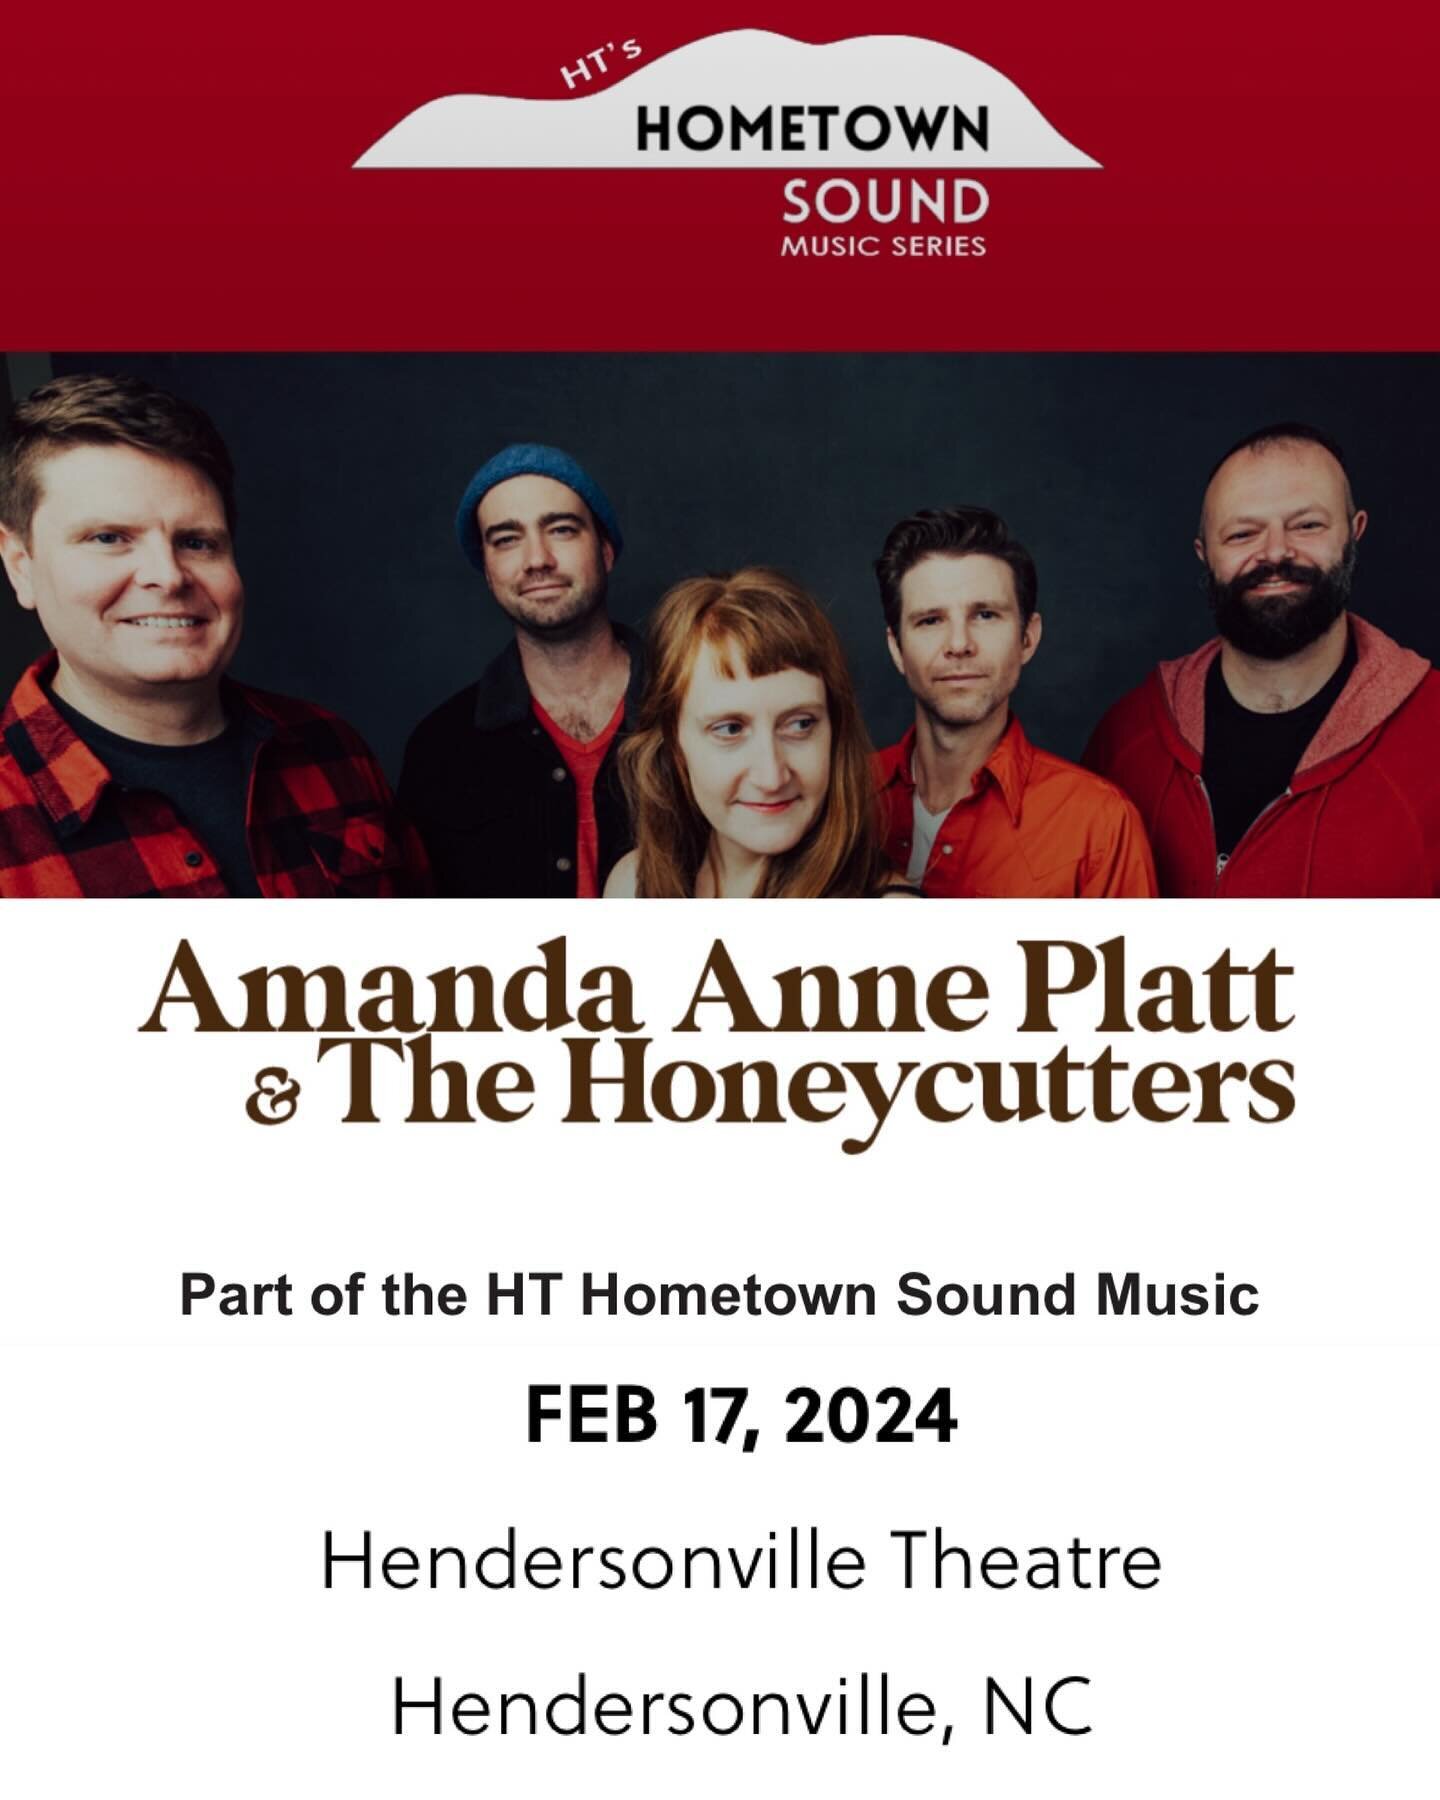 The Honeycutters &amp; the Hometown Sound Music Series at the Hendersonville Theater! See you on Saturday, February 17th✌🏼

, @hvltheatre on ✌🏼

https://hendersonvilletheatre.org/amanda-anne-platt-the-honeycutters/

#repost:
Hendersonville Theatre 